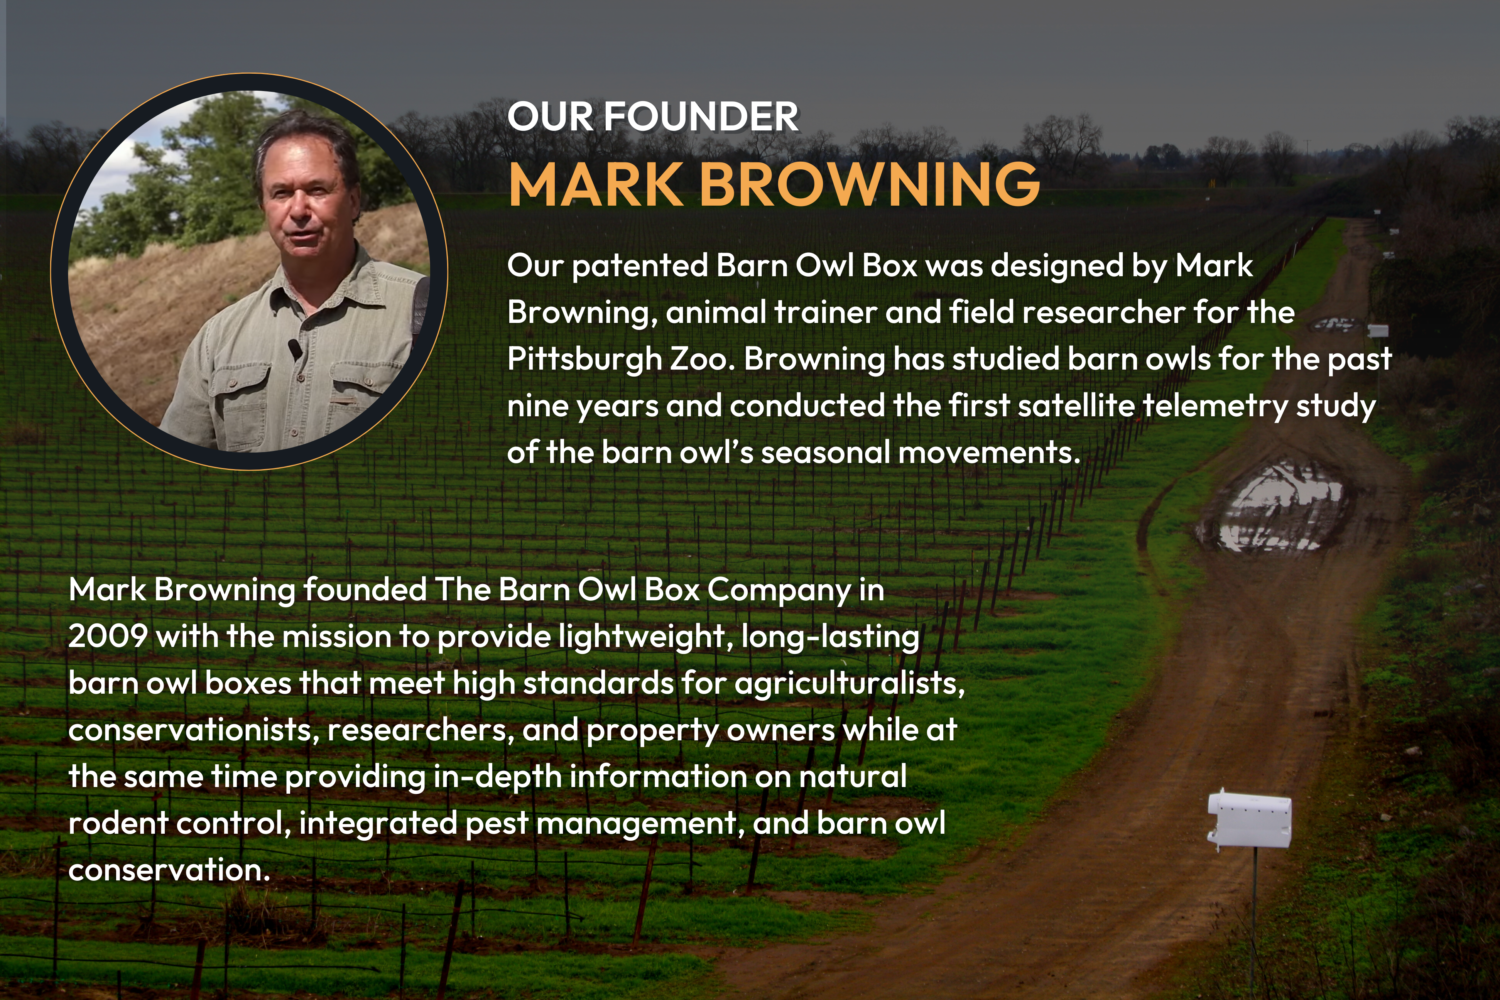 About our founder Mark Browning and his mission to create long lasting nest boxes for beneficial birds